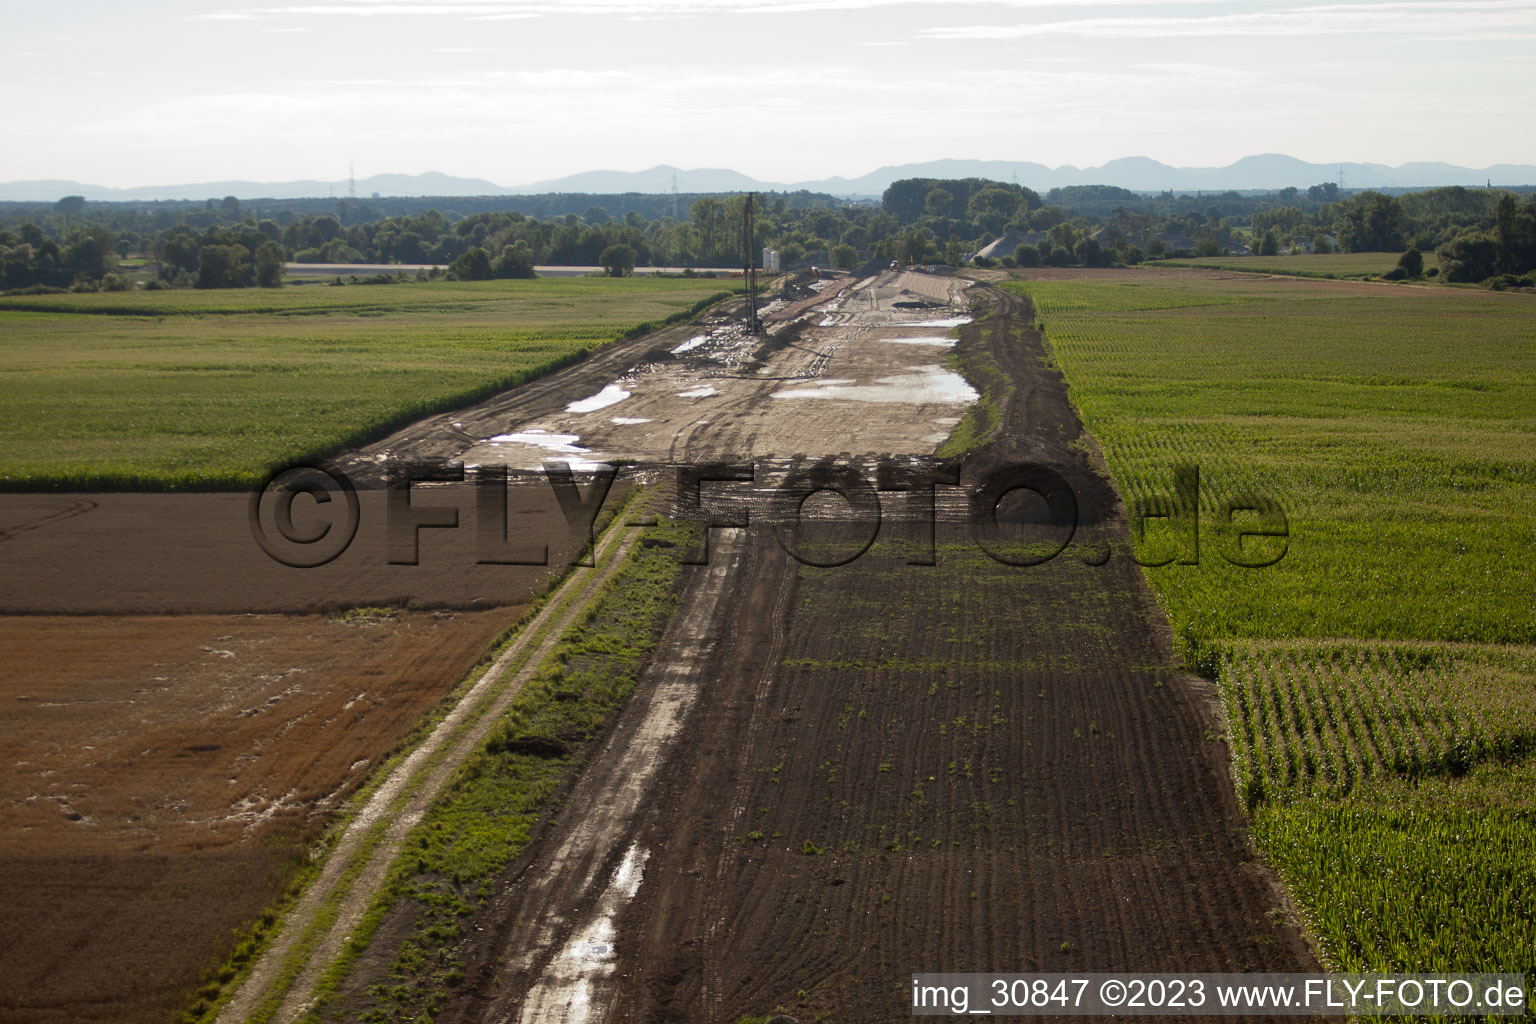 Aerial photograpy of Polder construction in Neupotz in the state Rhineland-Palatinate, Germany